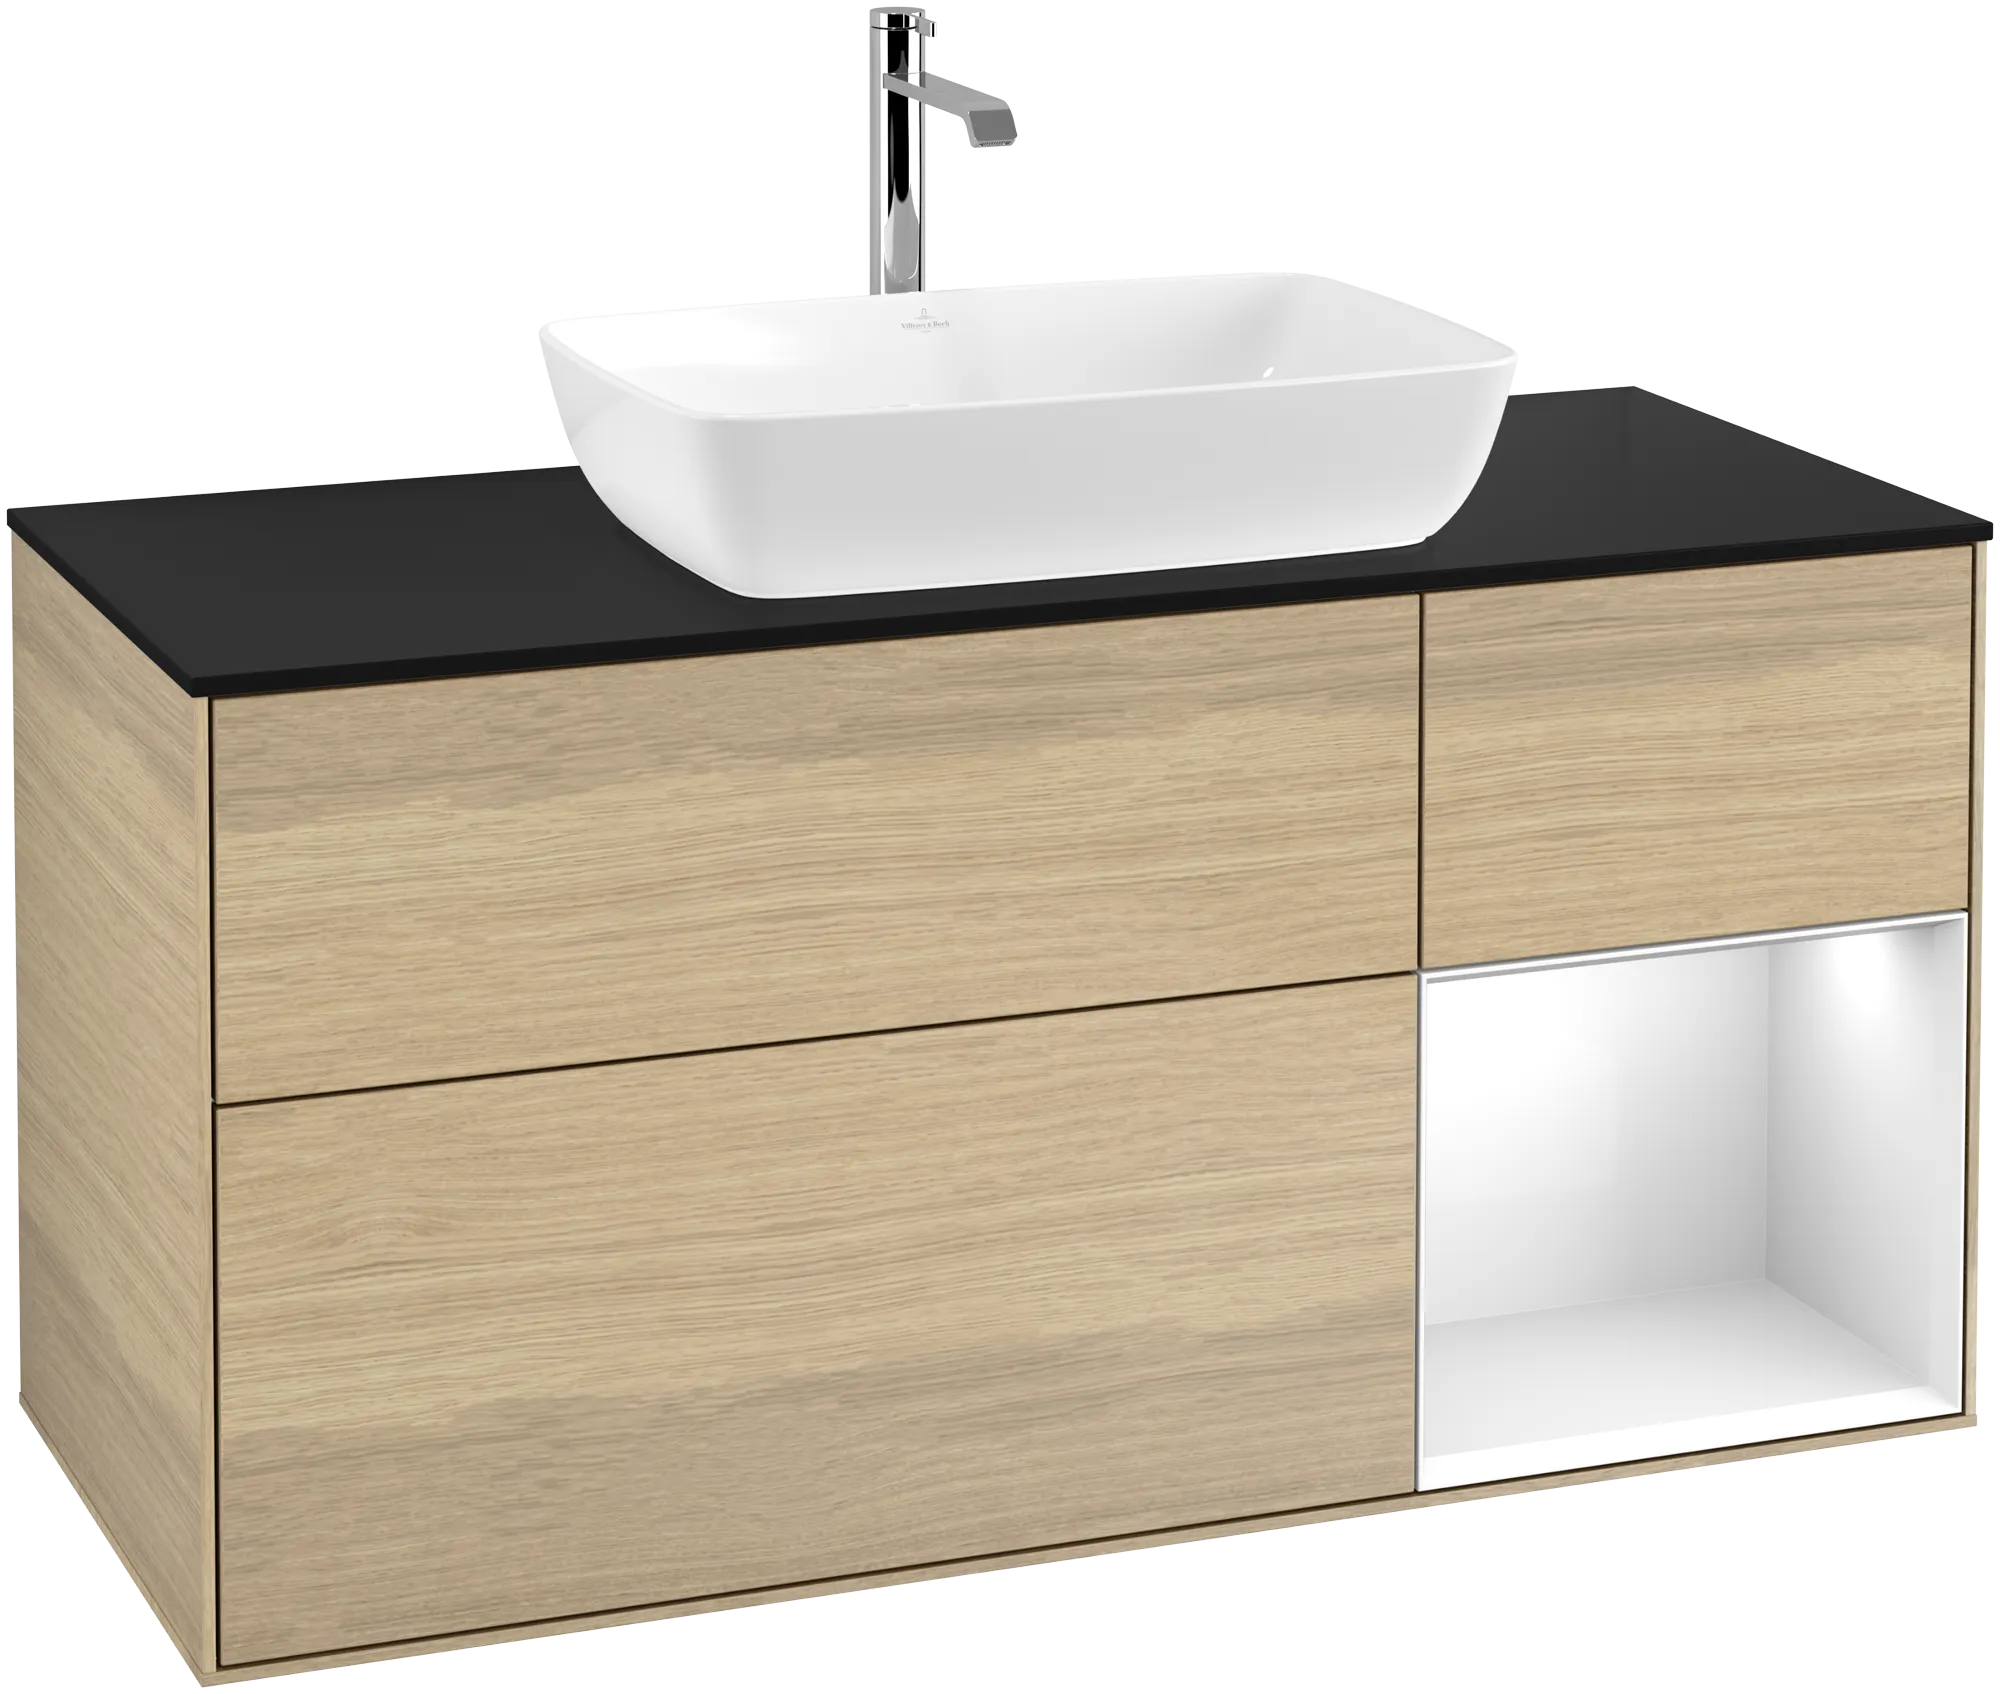 VILLEROY BOCH Finion Vanity unit, with lighting, 3 pull-out compartments, 1200 x 603 x 501 mm, Oak Veneer / Glossy White Lacquer / Glass Black Matt #G832GFPC resmi